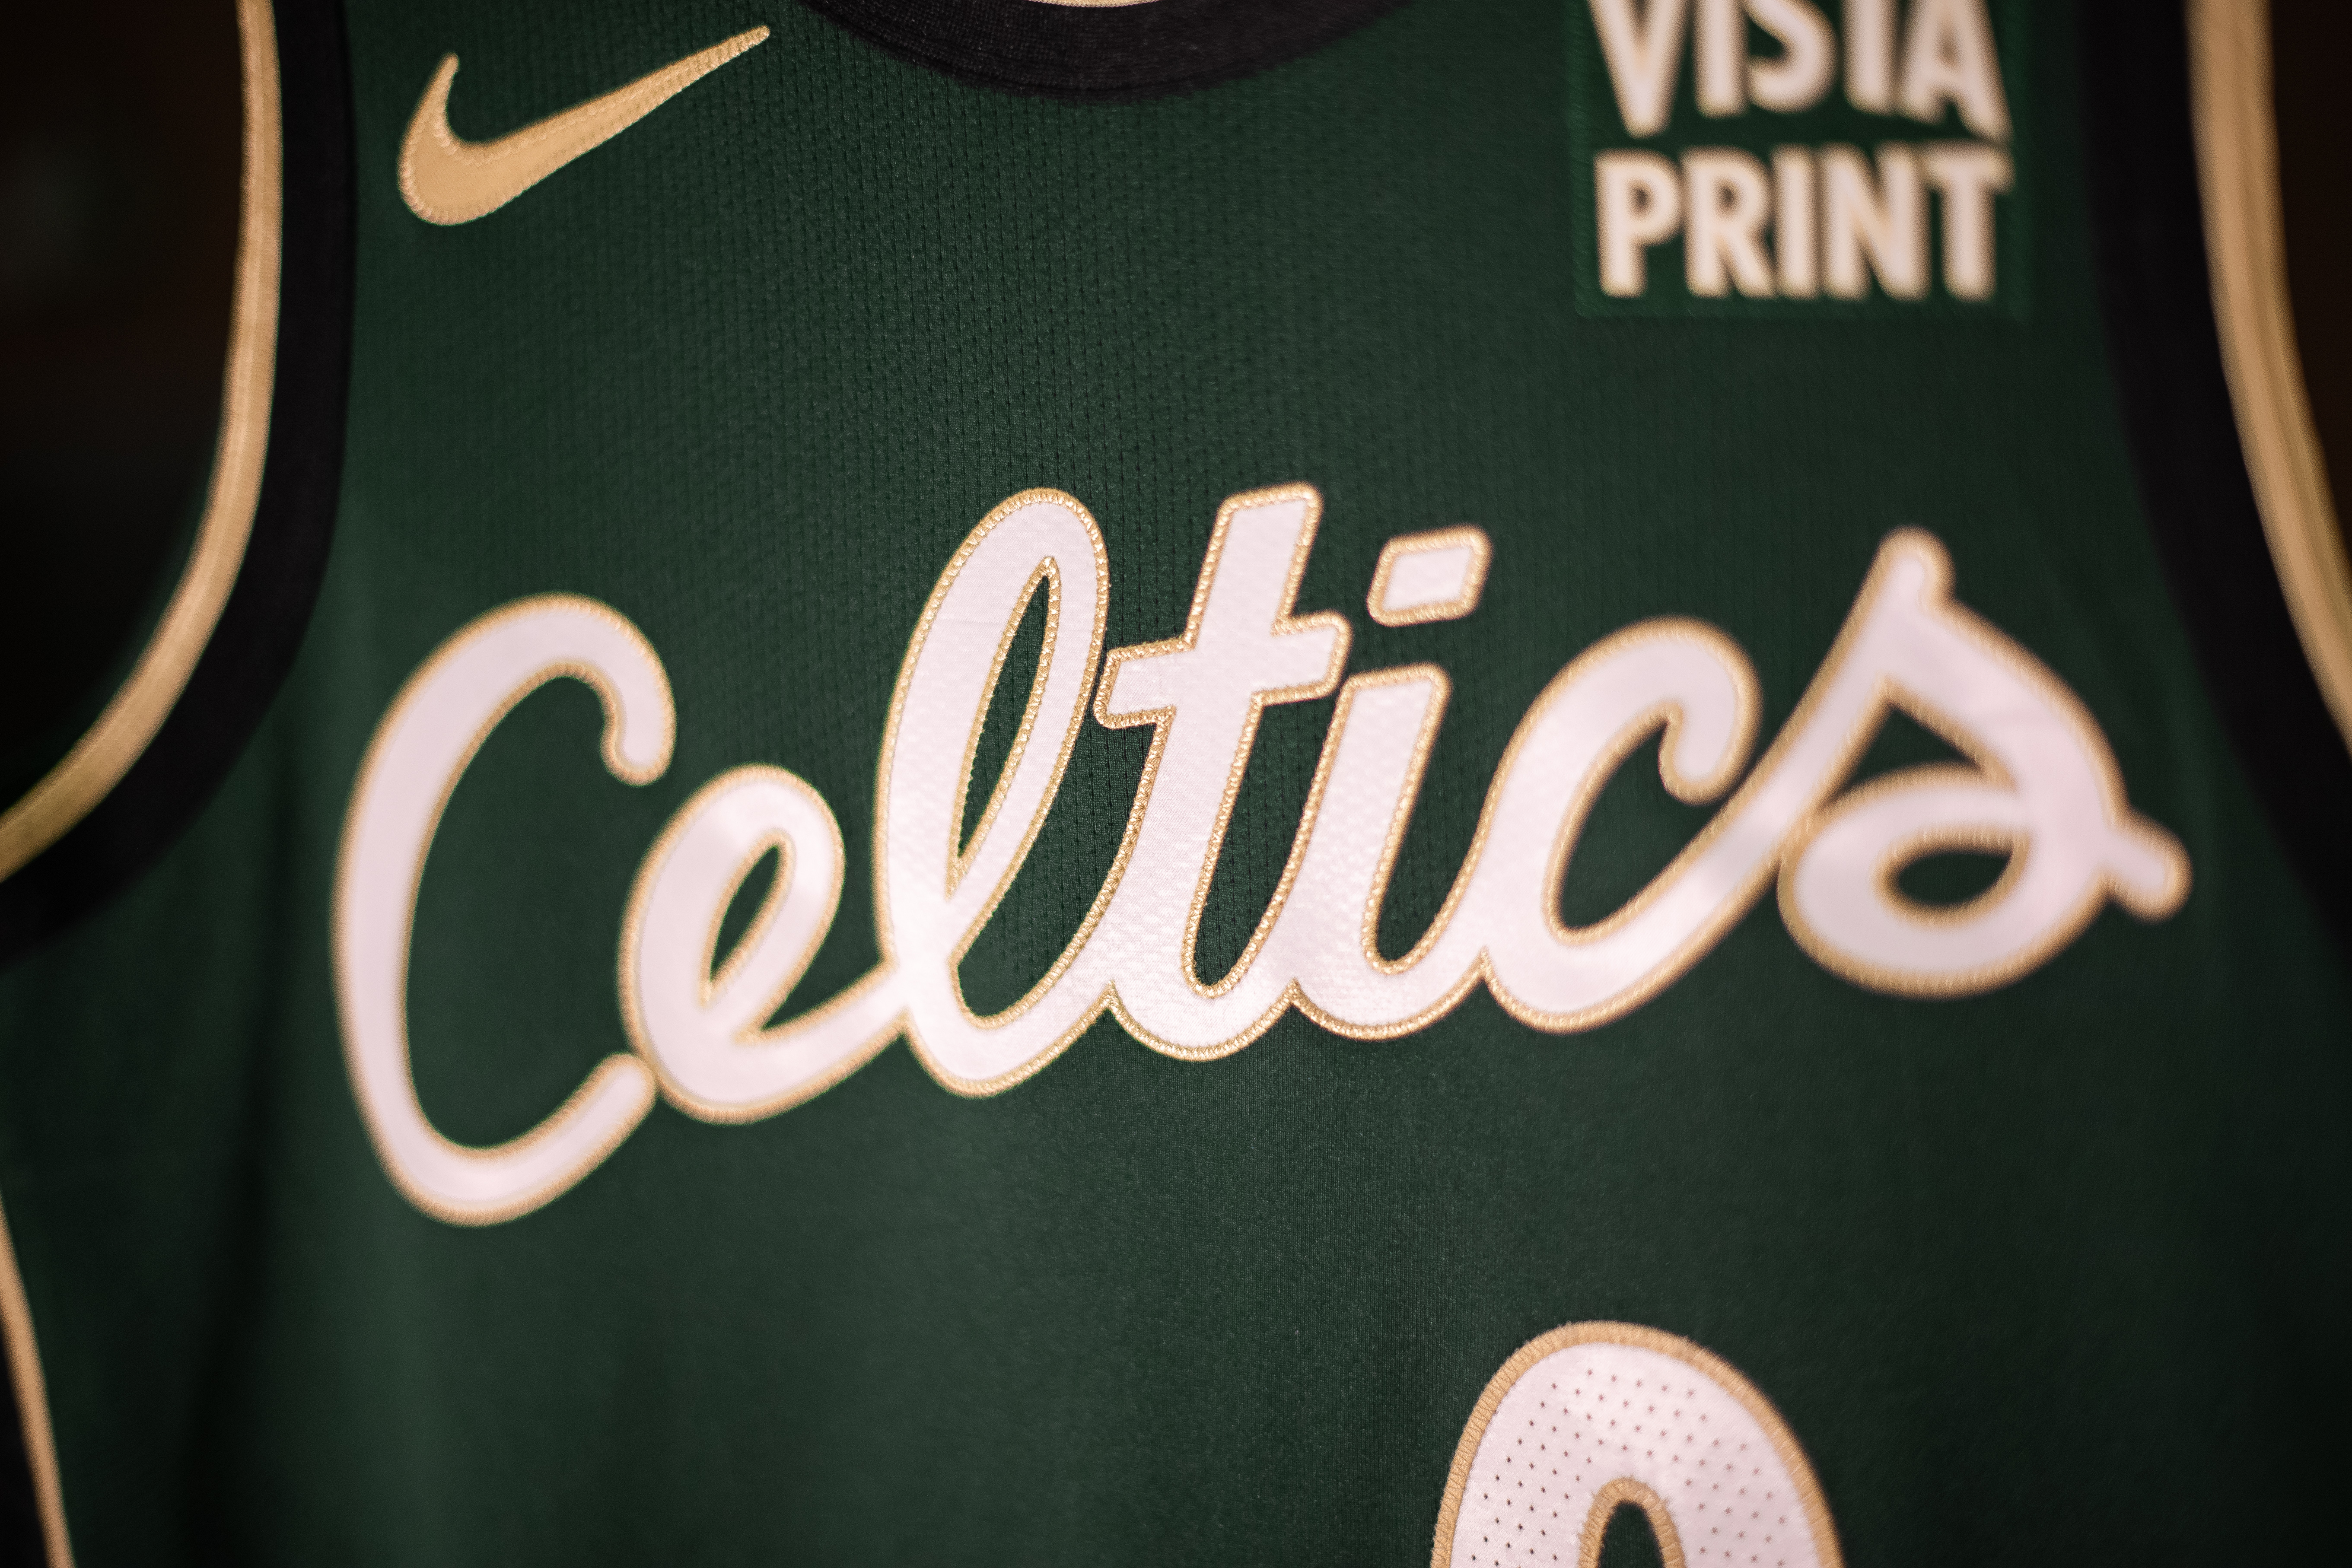 marcus smart official jersey